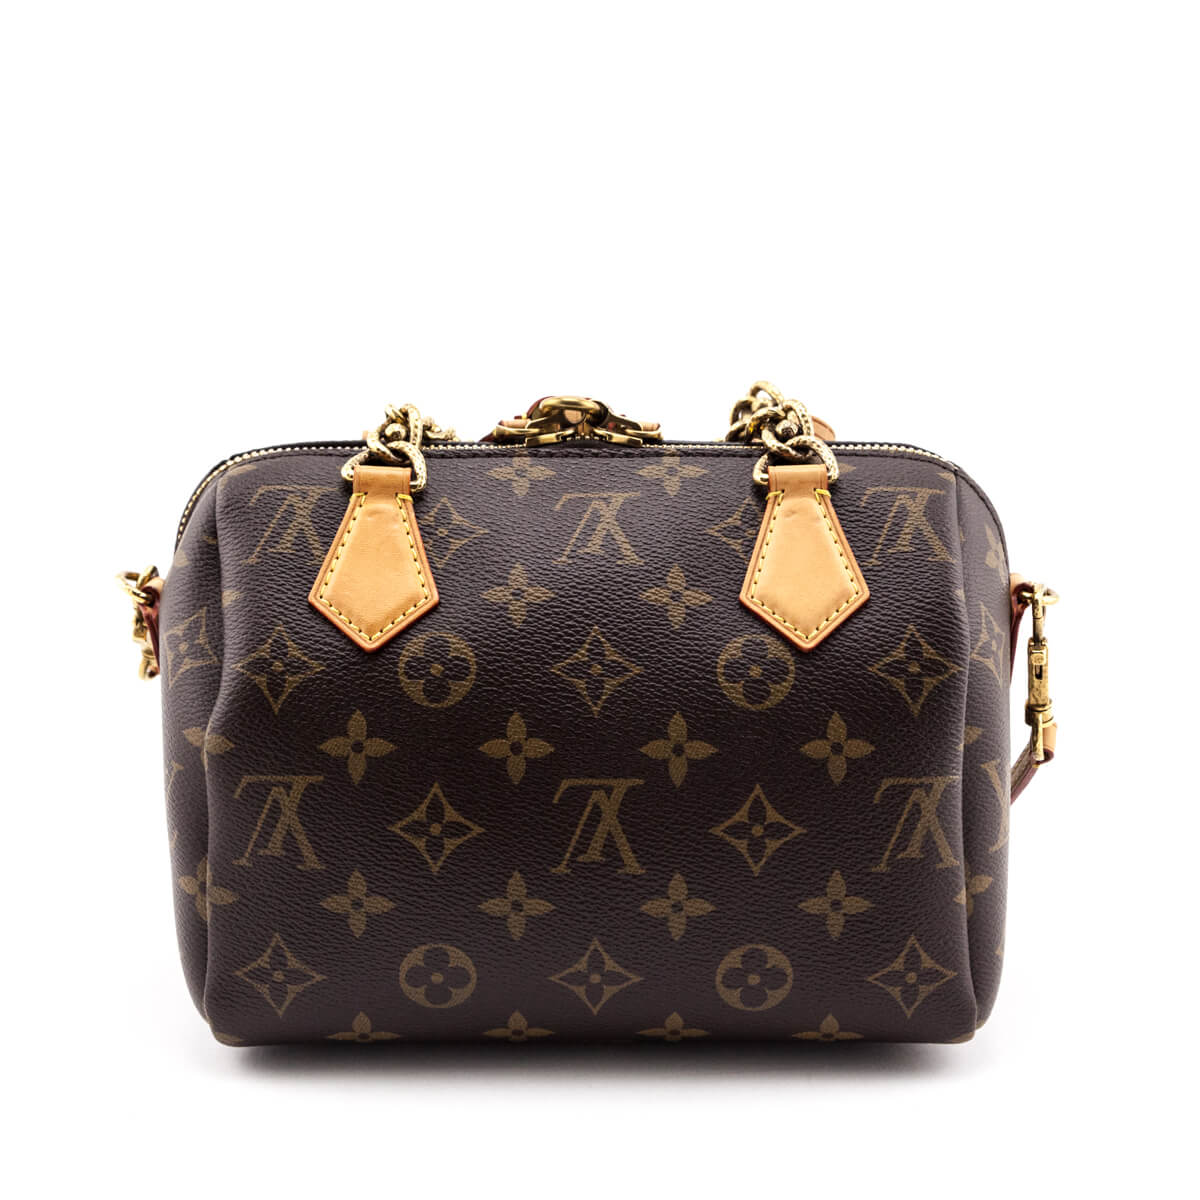 How to Authenticate a Louis Vuitton Bag with LOVEthatBAG